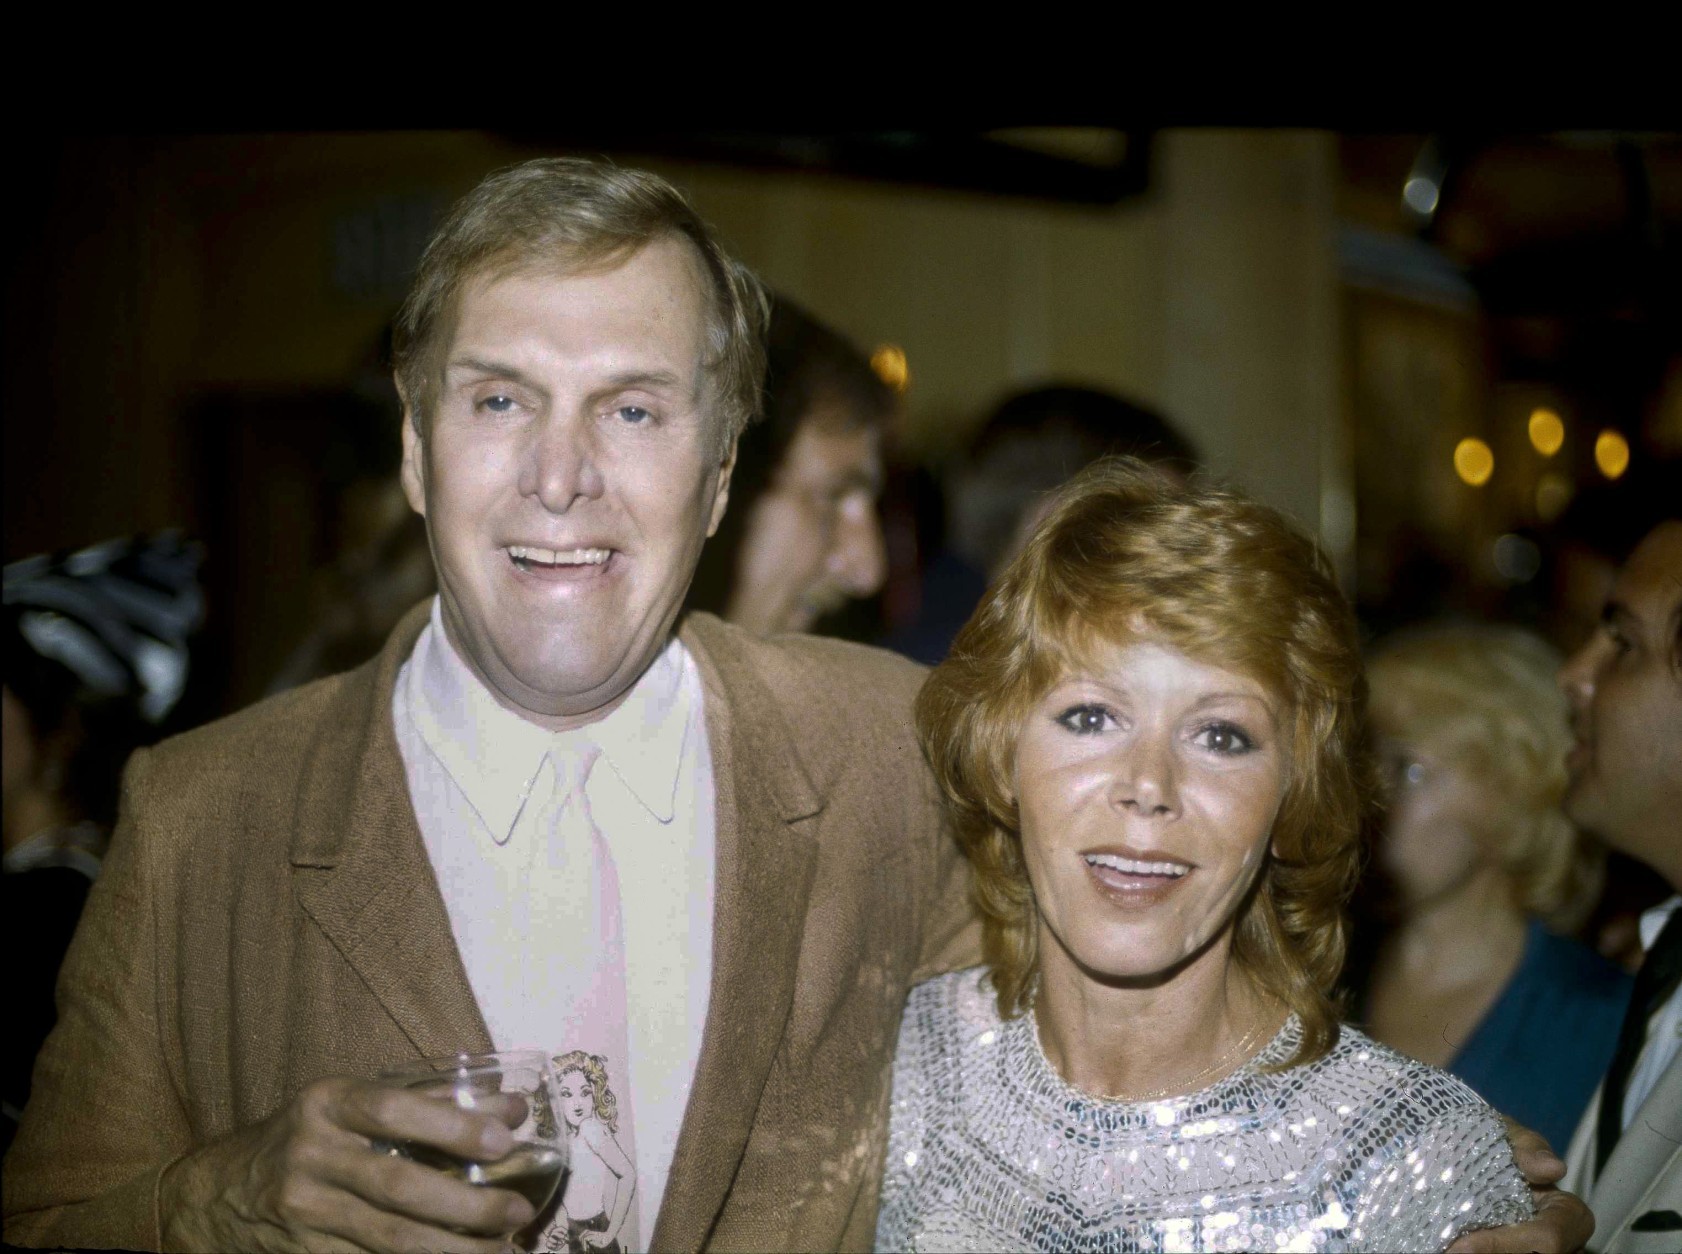 FILE - In this Tuesday, Sept. 13, 1983 file photo, actors Judy Carne and Alan Sues, left, of "Rowan And Martin's Laugh-In" are shown during a "Laugh-In" reunion party, in Los Angeles. Laugh-In star Judy Carne has died in a British hospital. She was 76. She was famous for popularizing the Sock it to Me phrase on the hit TV show that started in the late 1960s. Her death was confirmed Tuesday, Sept. 8, 2015 in an e-mail by Eva Duffy, spokeswoman for Northampton General Hospital. Duffy said Carne died in the hospital on September 3. Newspaper reports said she had suffered from pneumonia. (AP Photo/Doug Pizac, file)